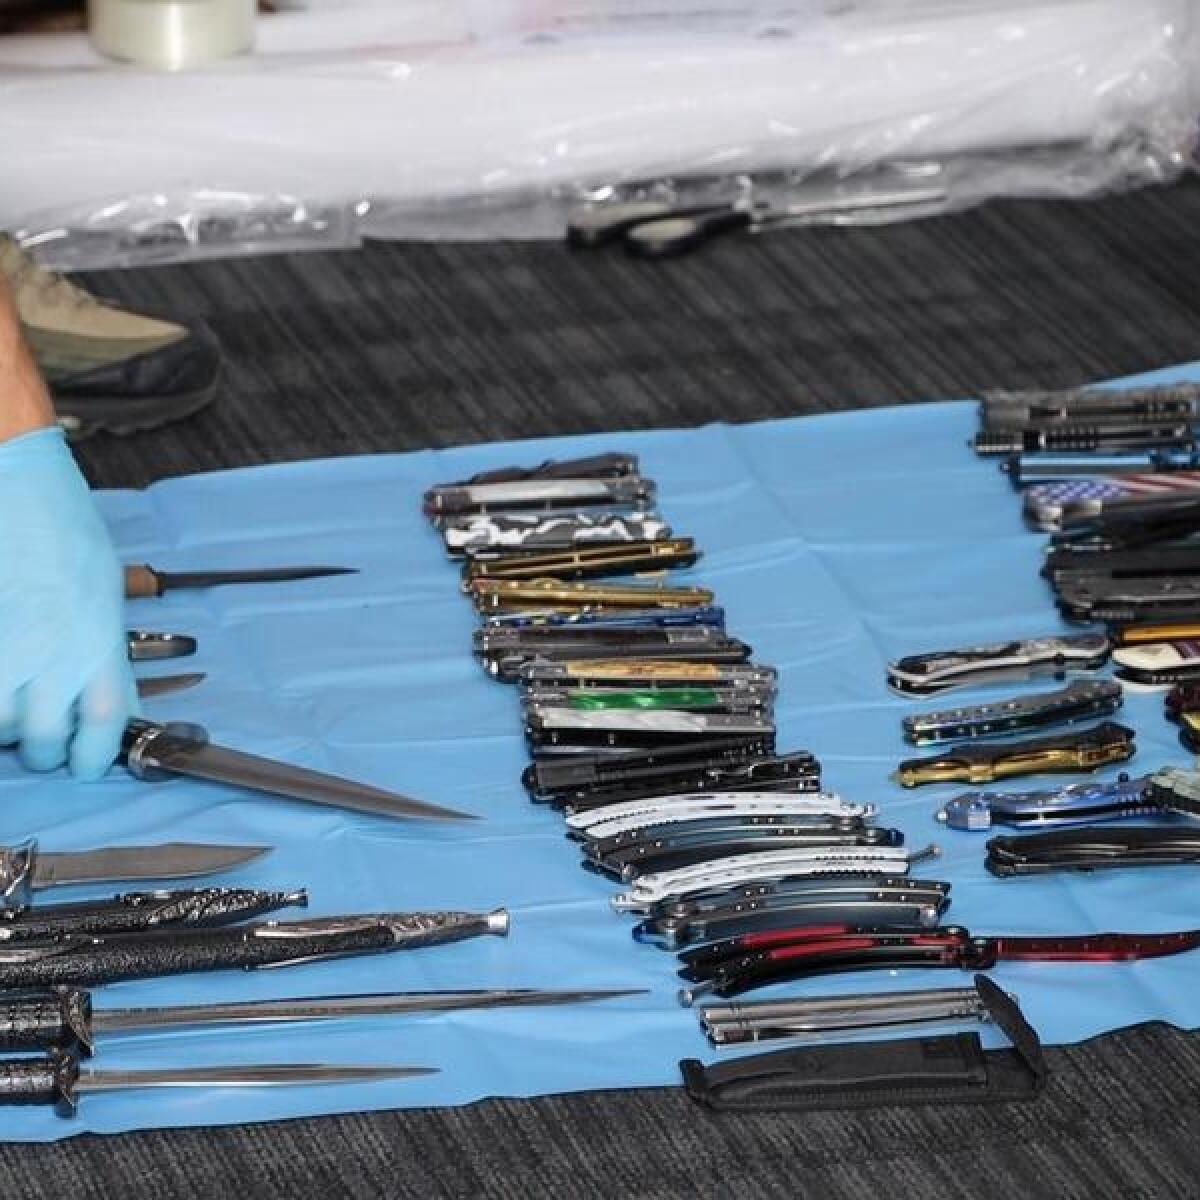 Weapons seized in Melbourne.